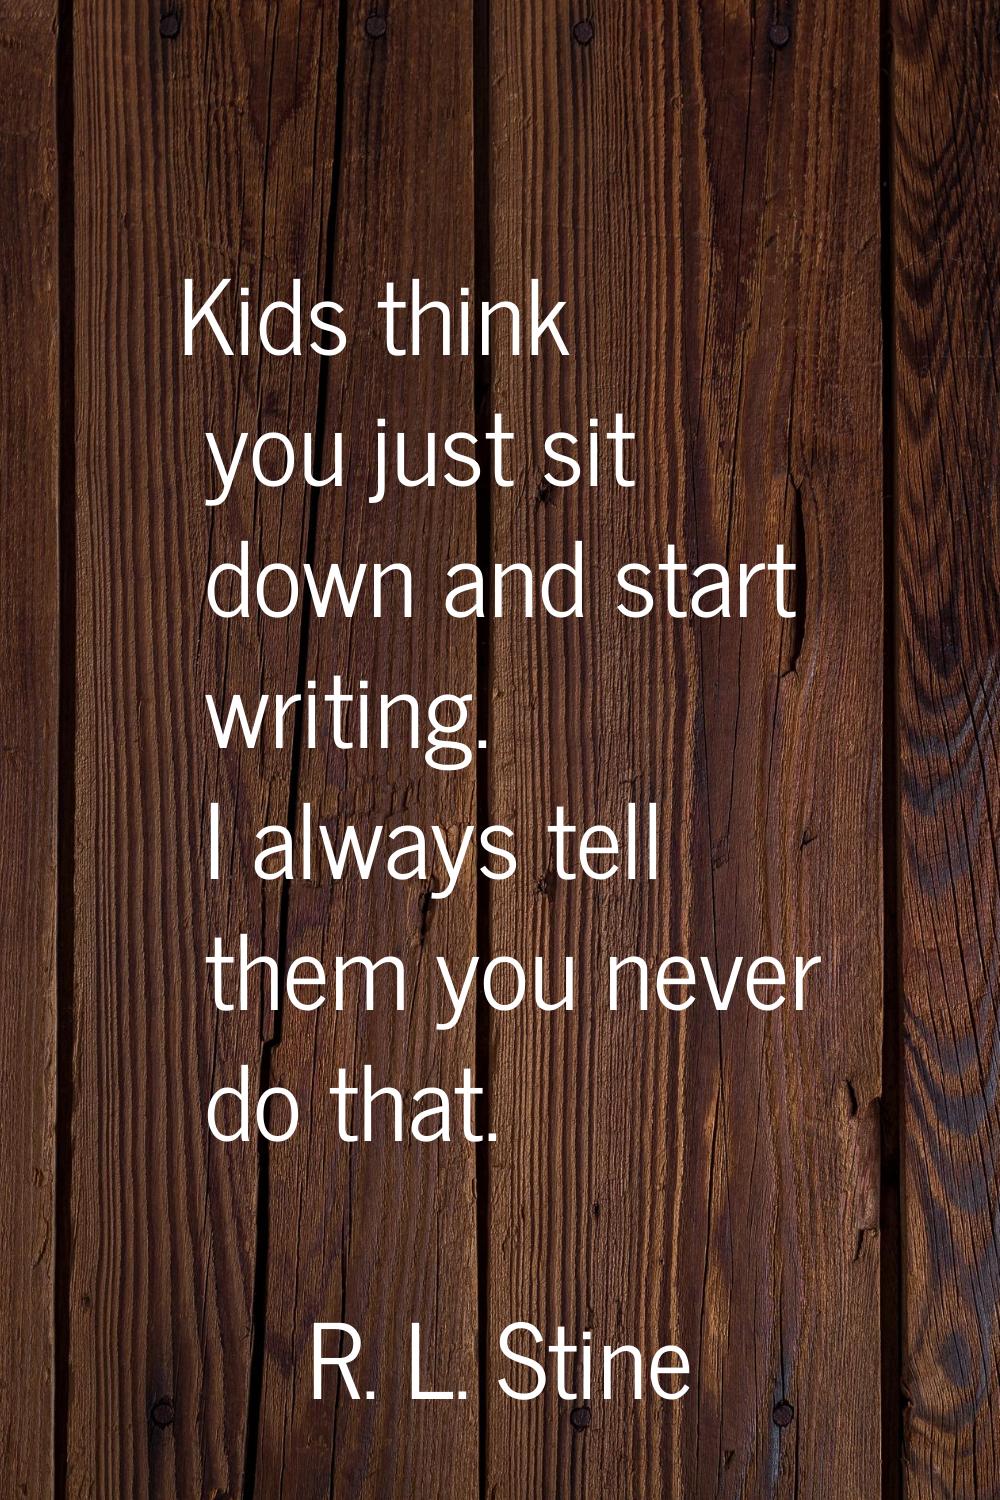 Kids think you just sit down and start writing. I always tell them you never do that.